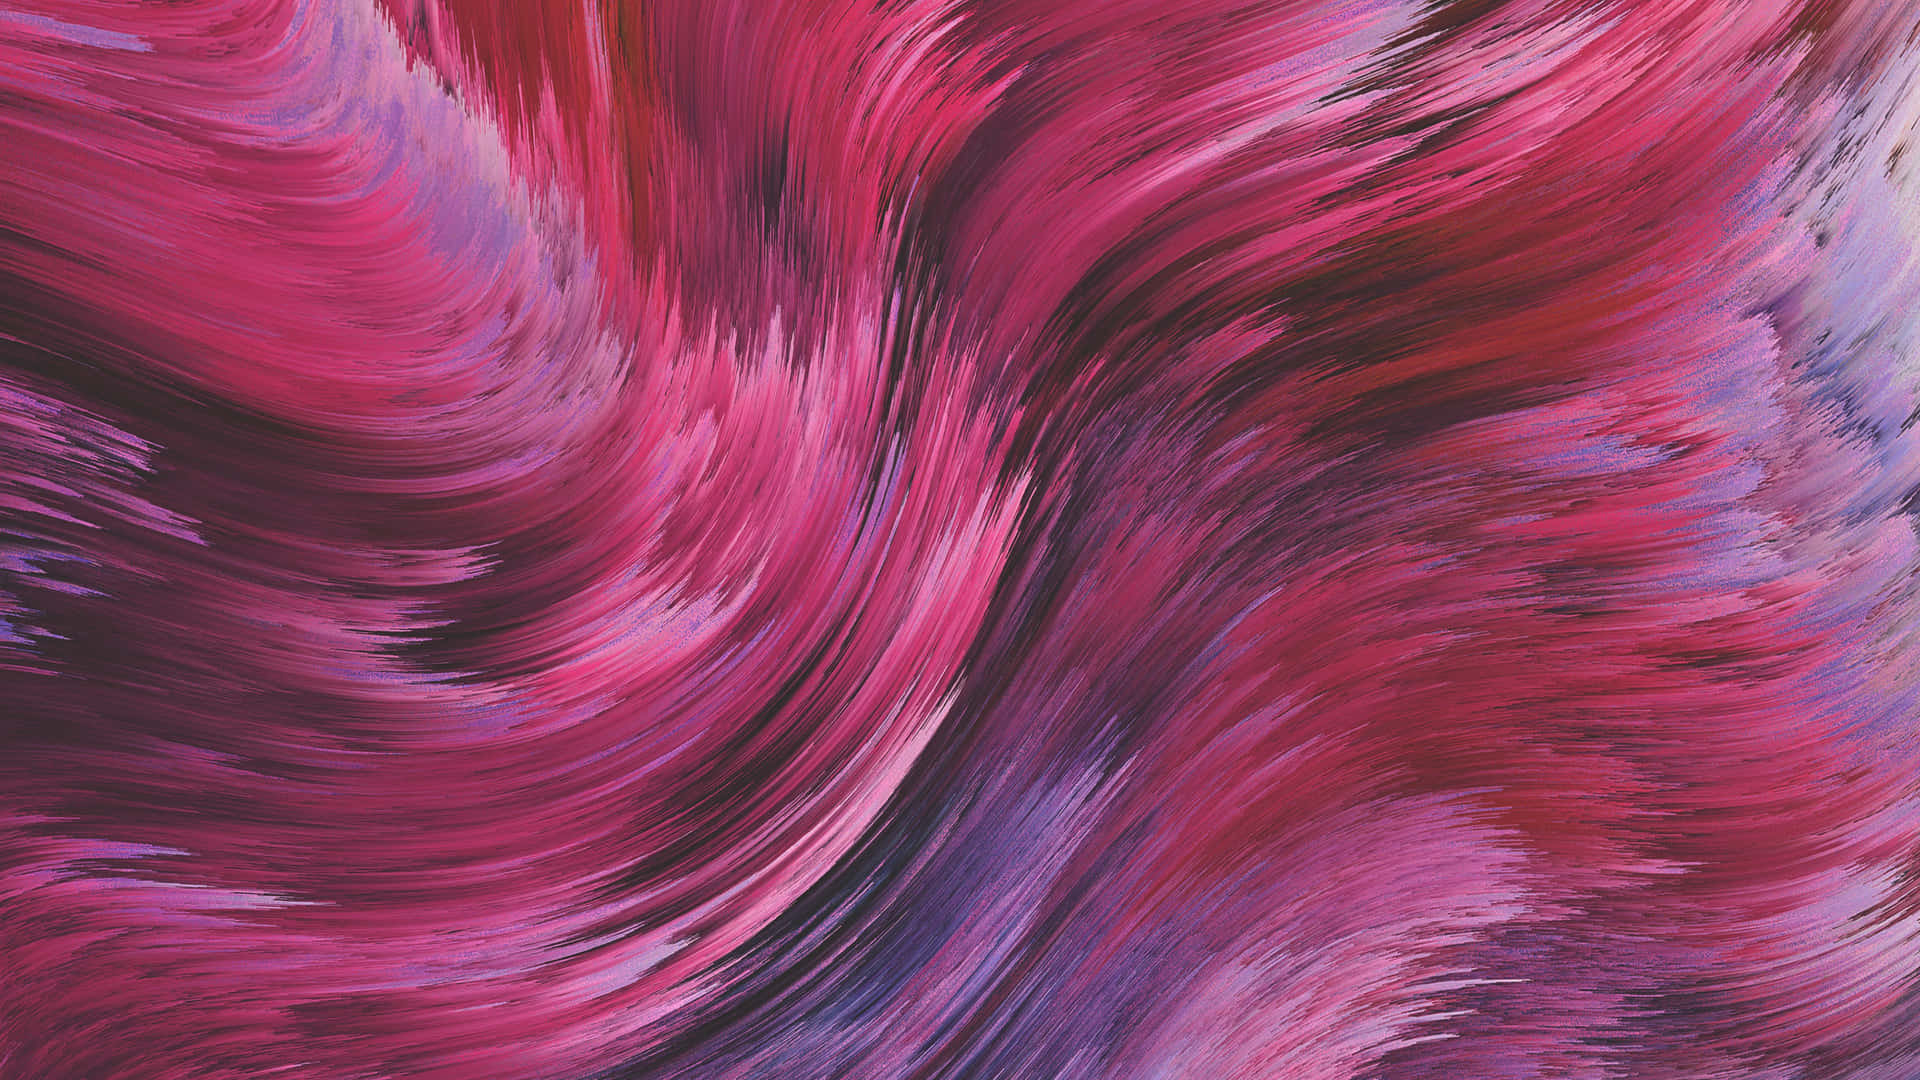 Get Lost In This Whimsical World Of Vibrant Colors And Creative Abstract Art. Wallpaper